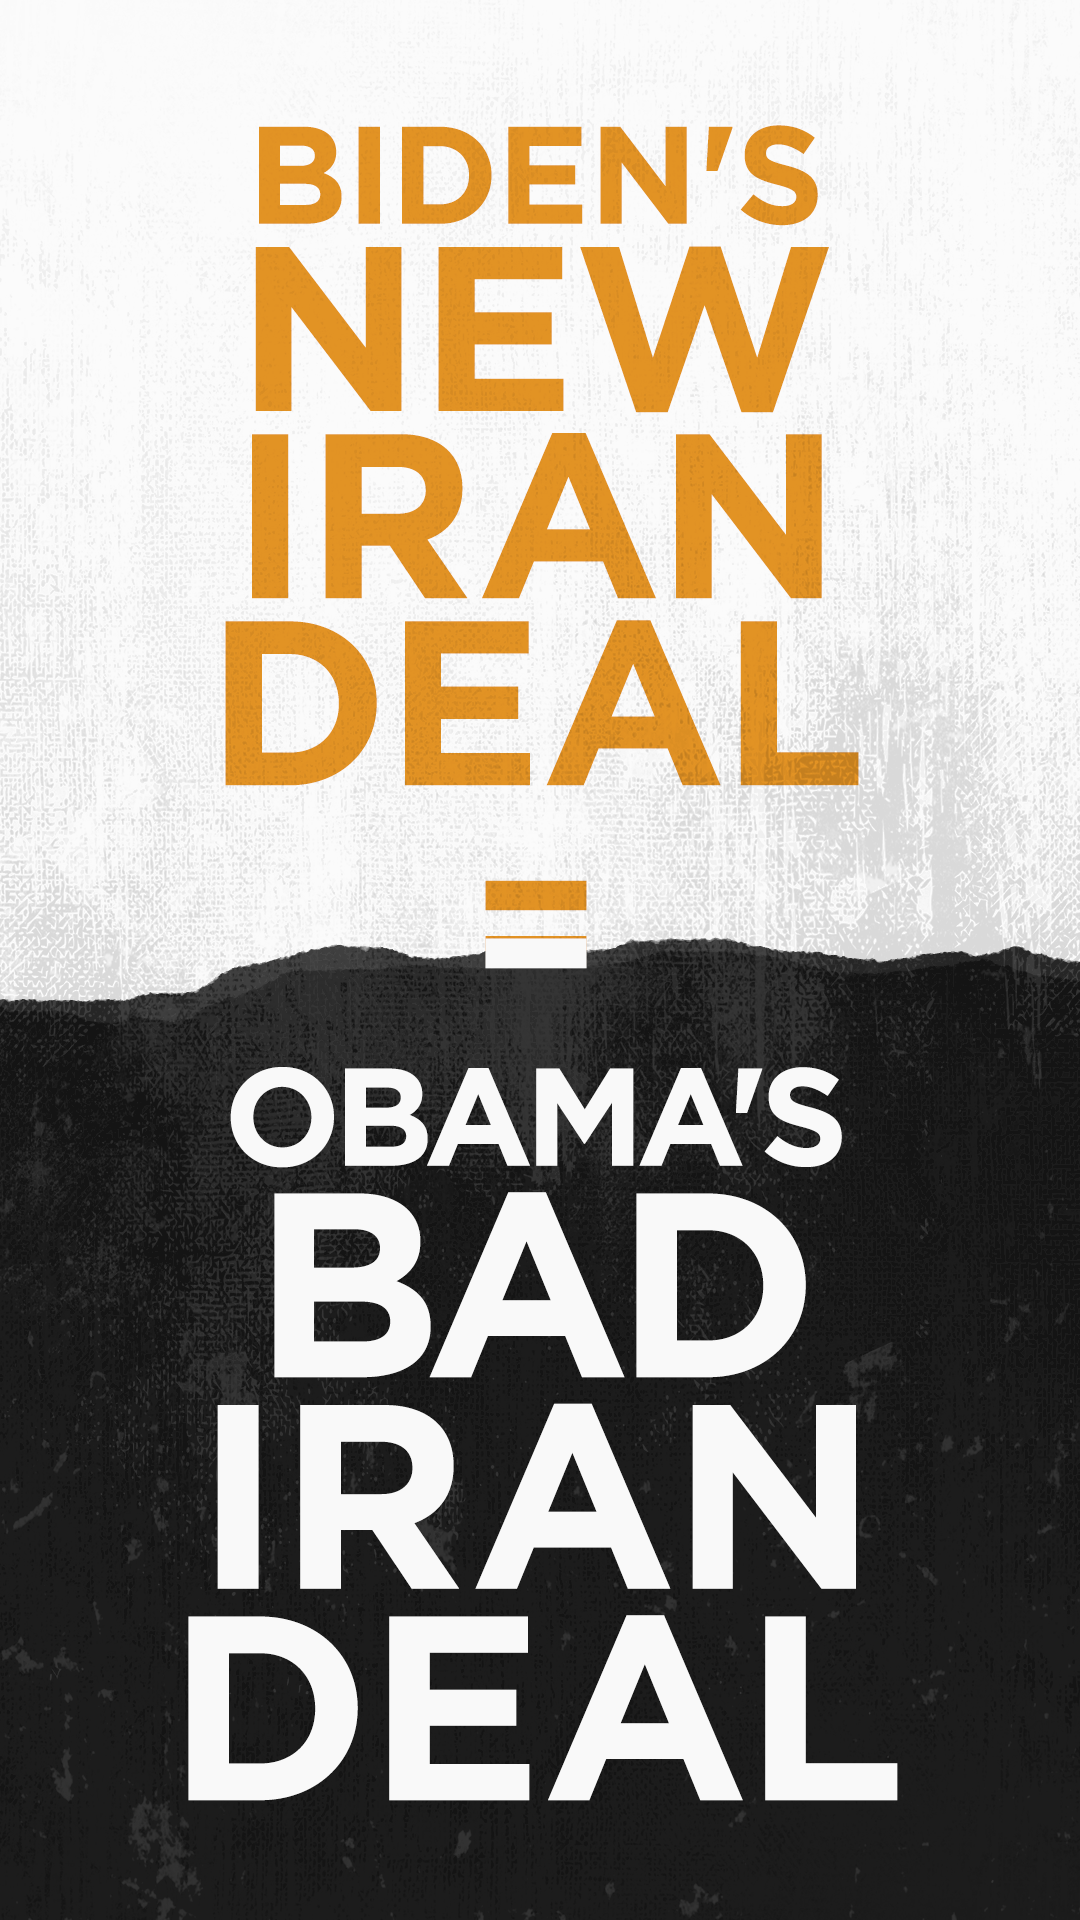 Biden's new Iran Deal is equal to Obama's bad Iran Deal.